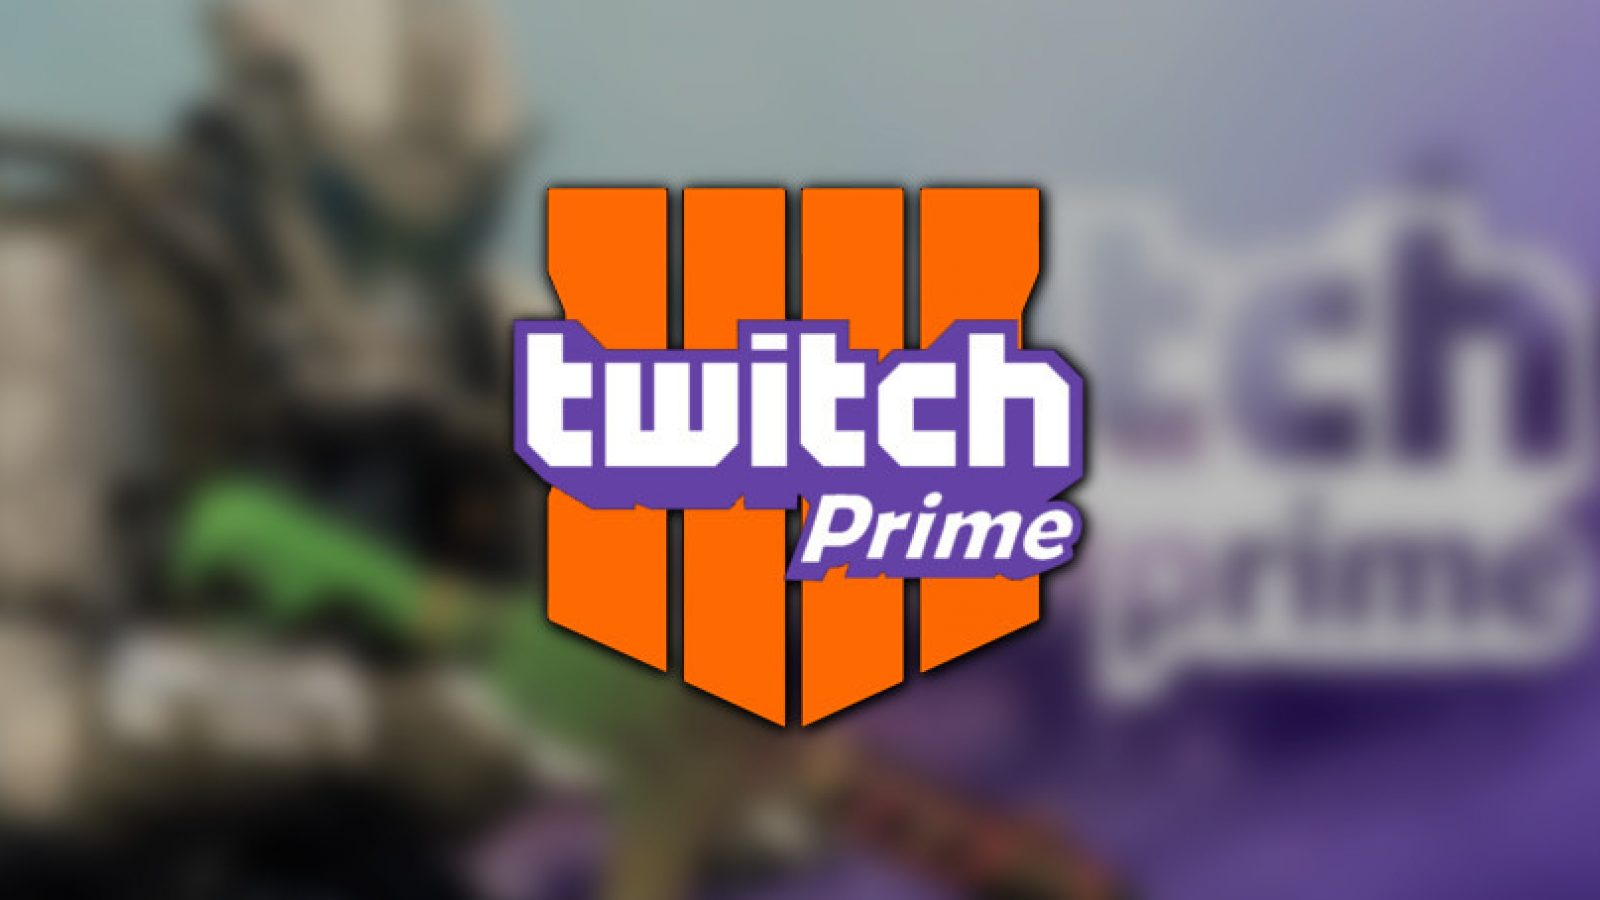 Grab some Goods: Twitch Prime Has a Free Call of Duty®: Black Ops 4 Item  Drop to Collect